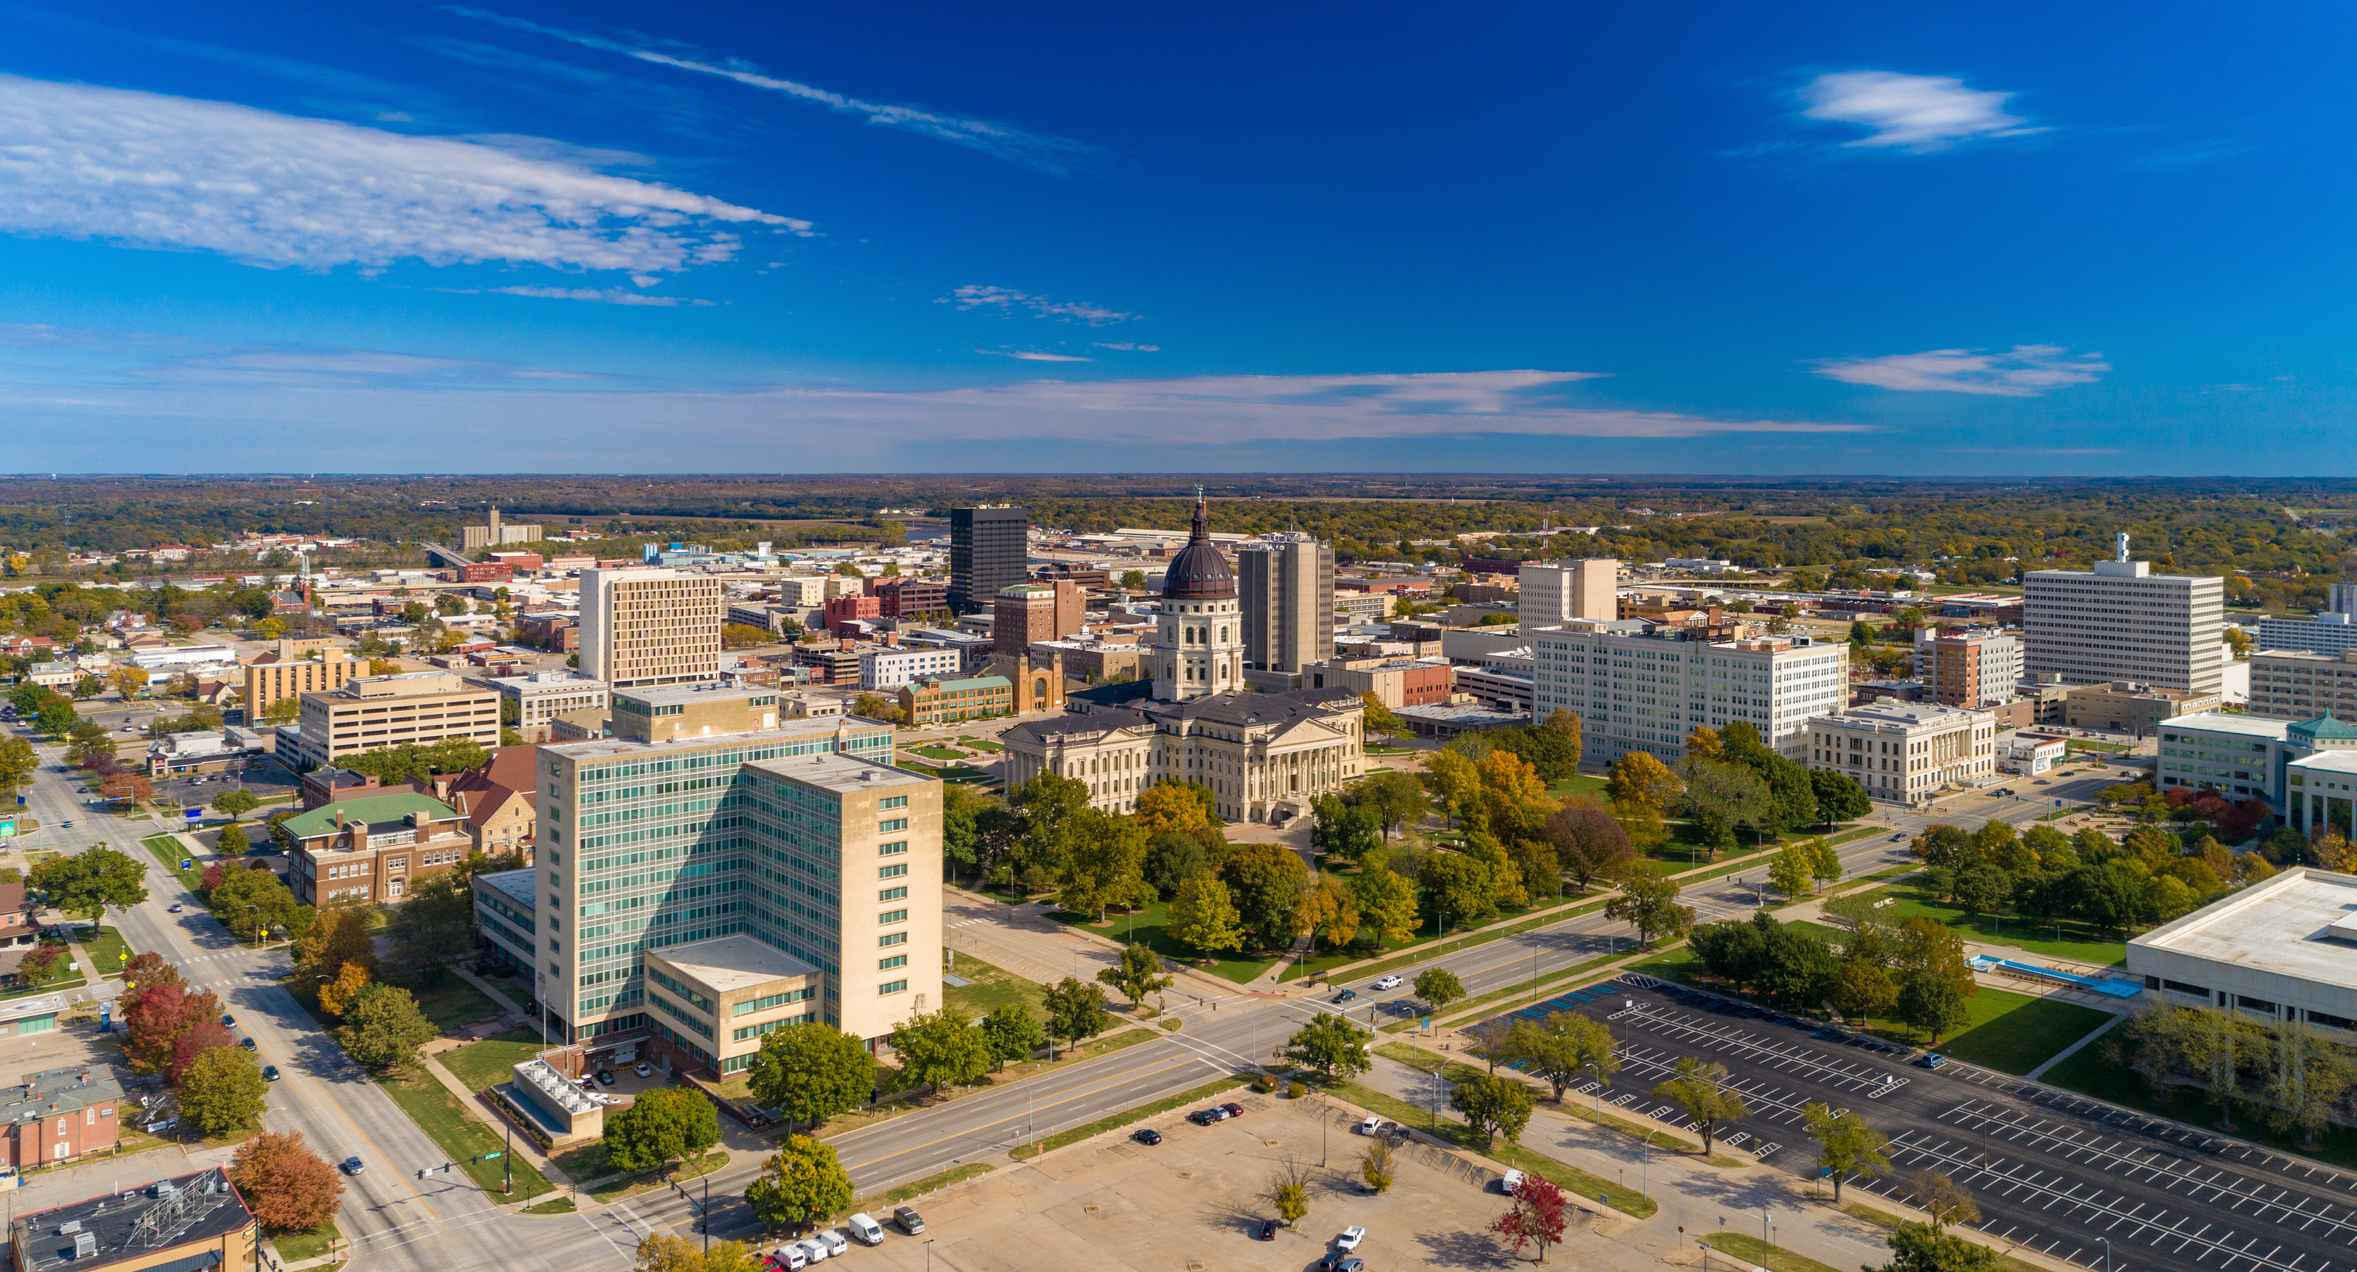 Topeka Aerial Skyline View With State Capitol Building